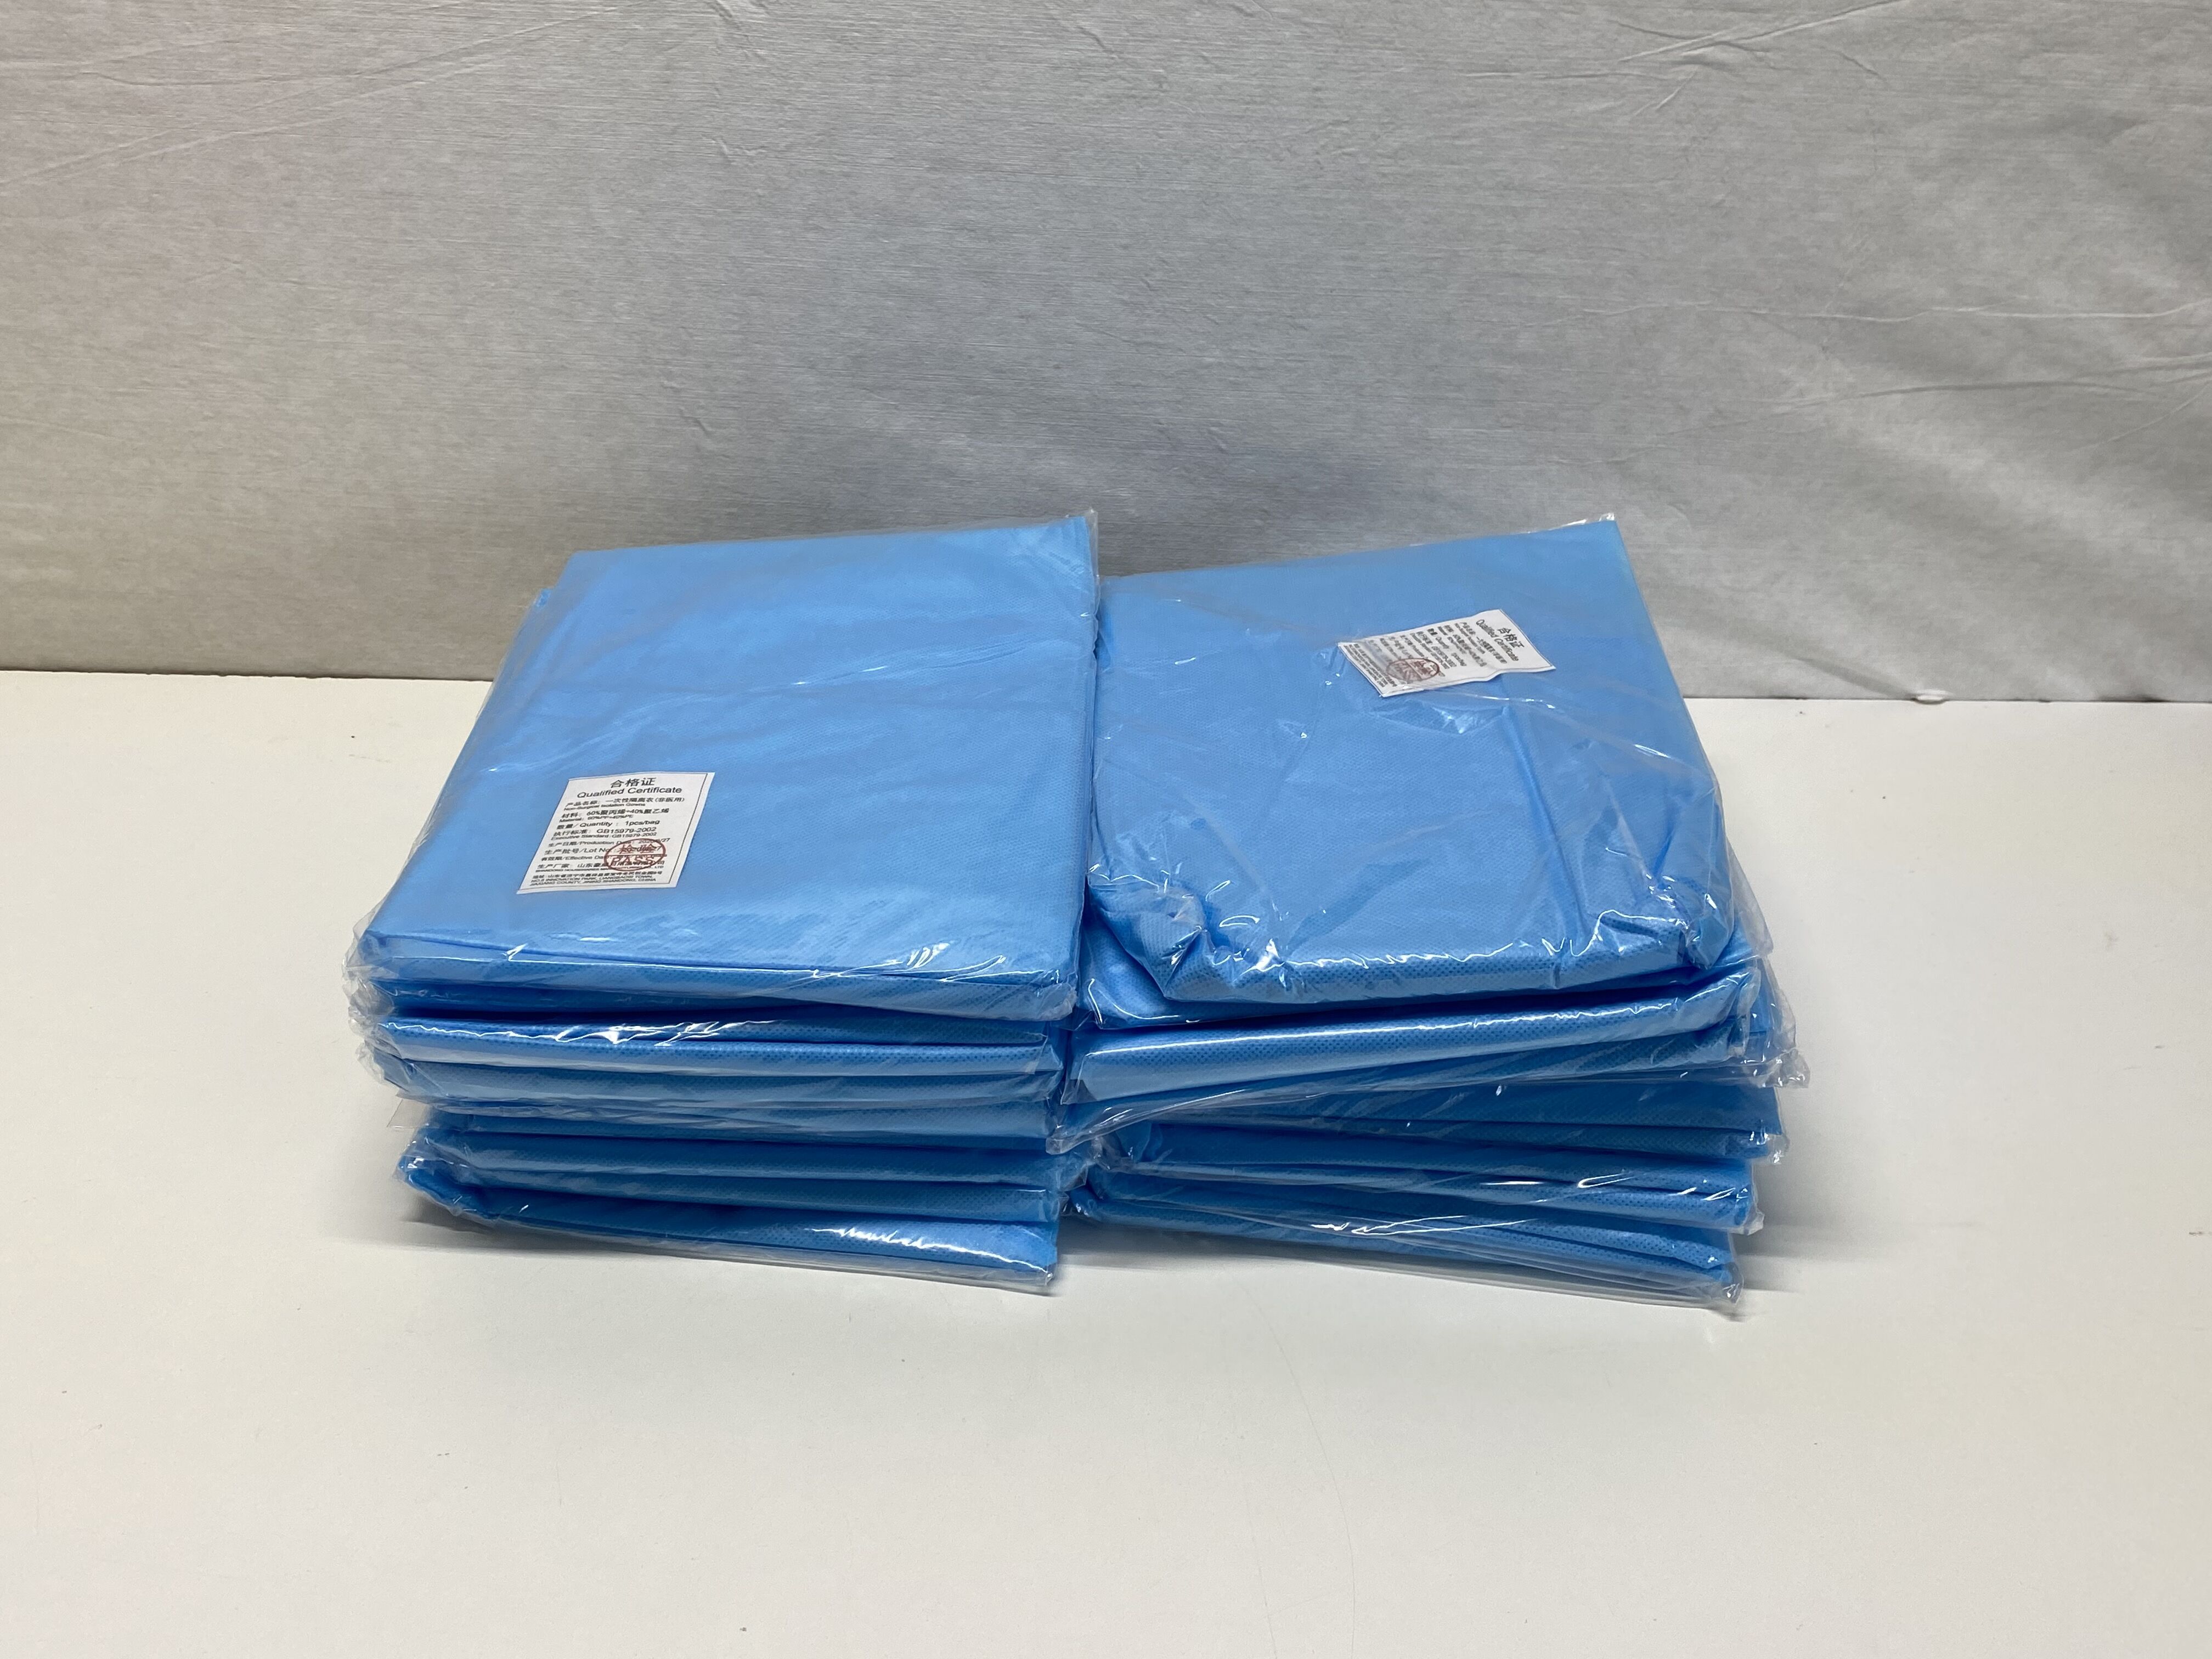 New HALYARD Lot of 50 Non Surgical Isolation Gowns GB15979-2002 (Q8 ...